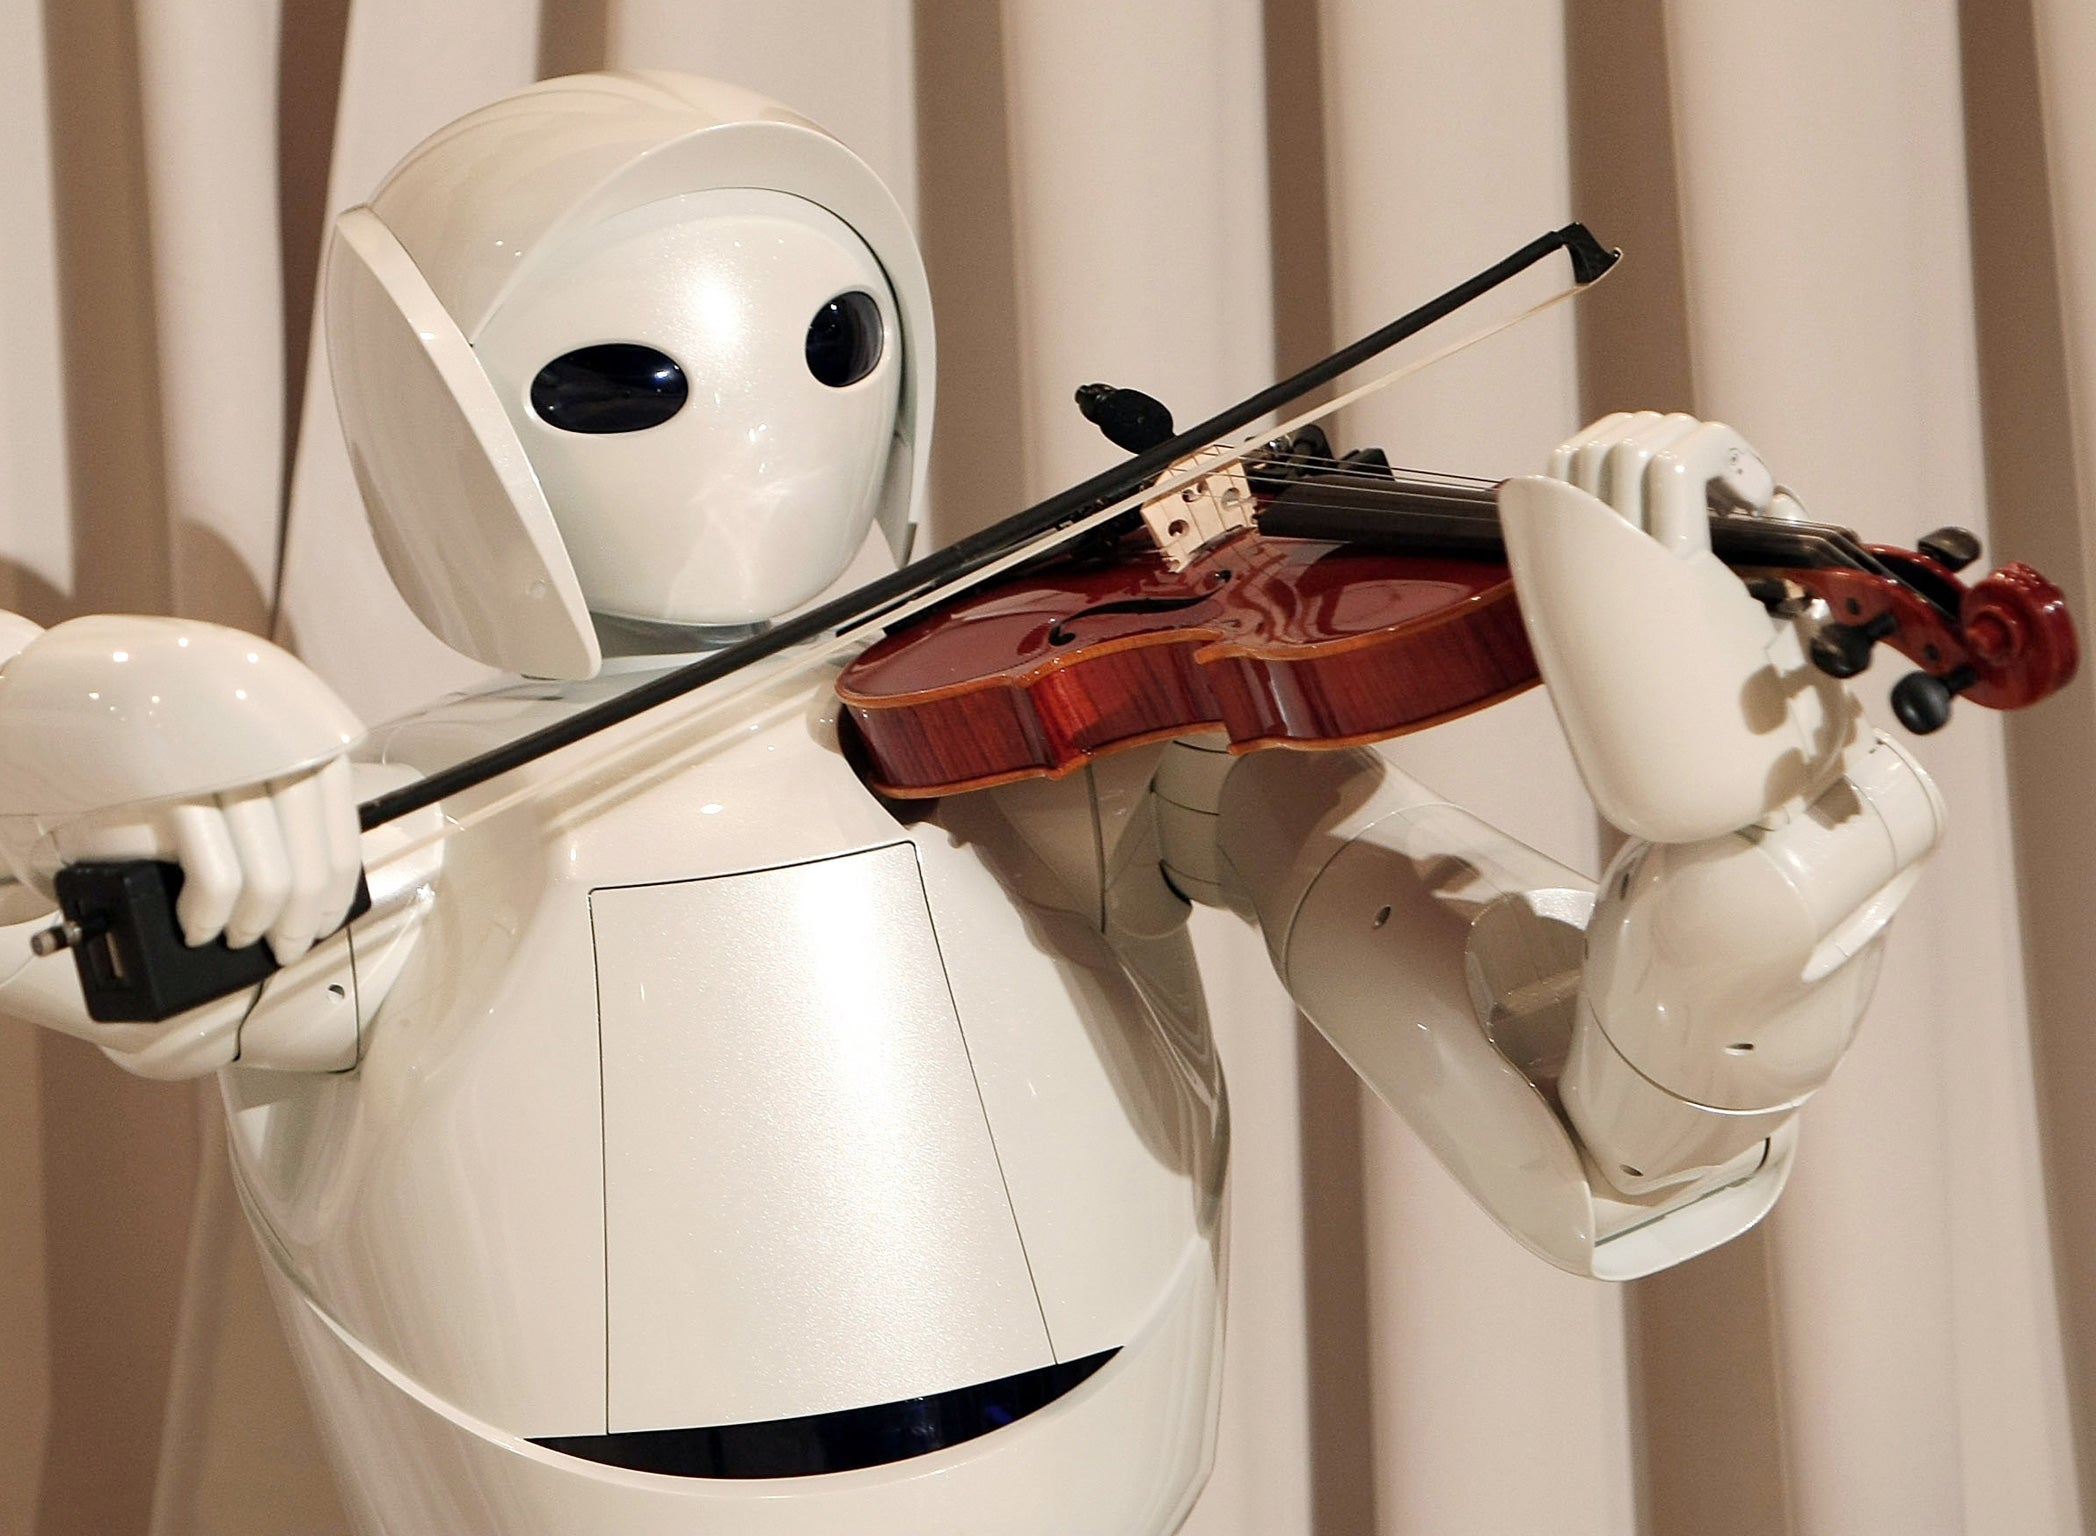 Toyota's violin-playing robot plays at Tokyo's Universal Design Showcase in 2007